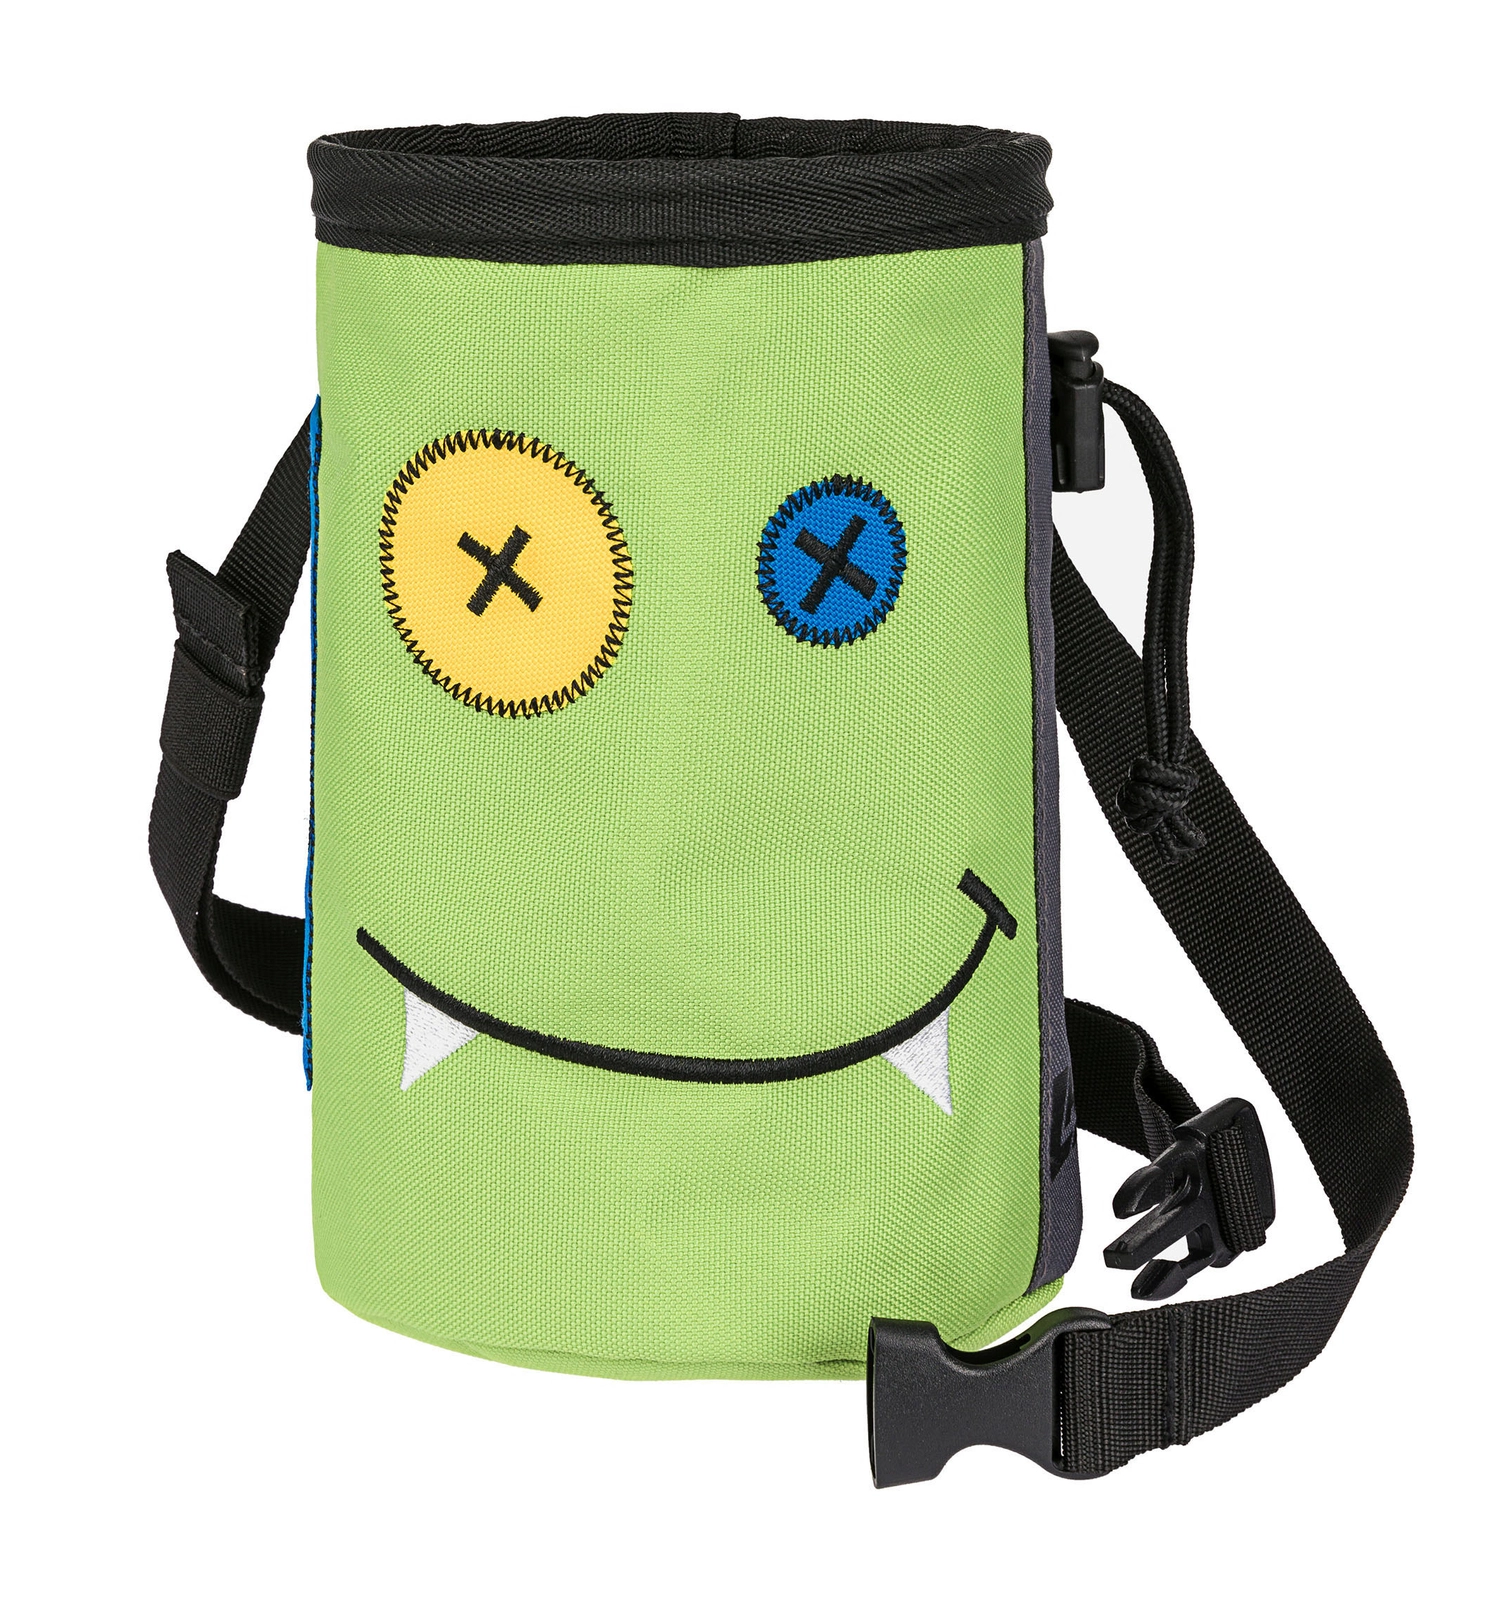 LACD Chalk Bag Ugly Face